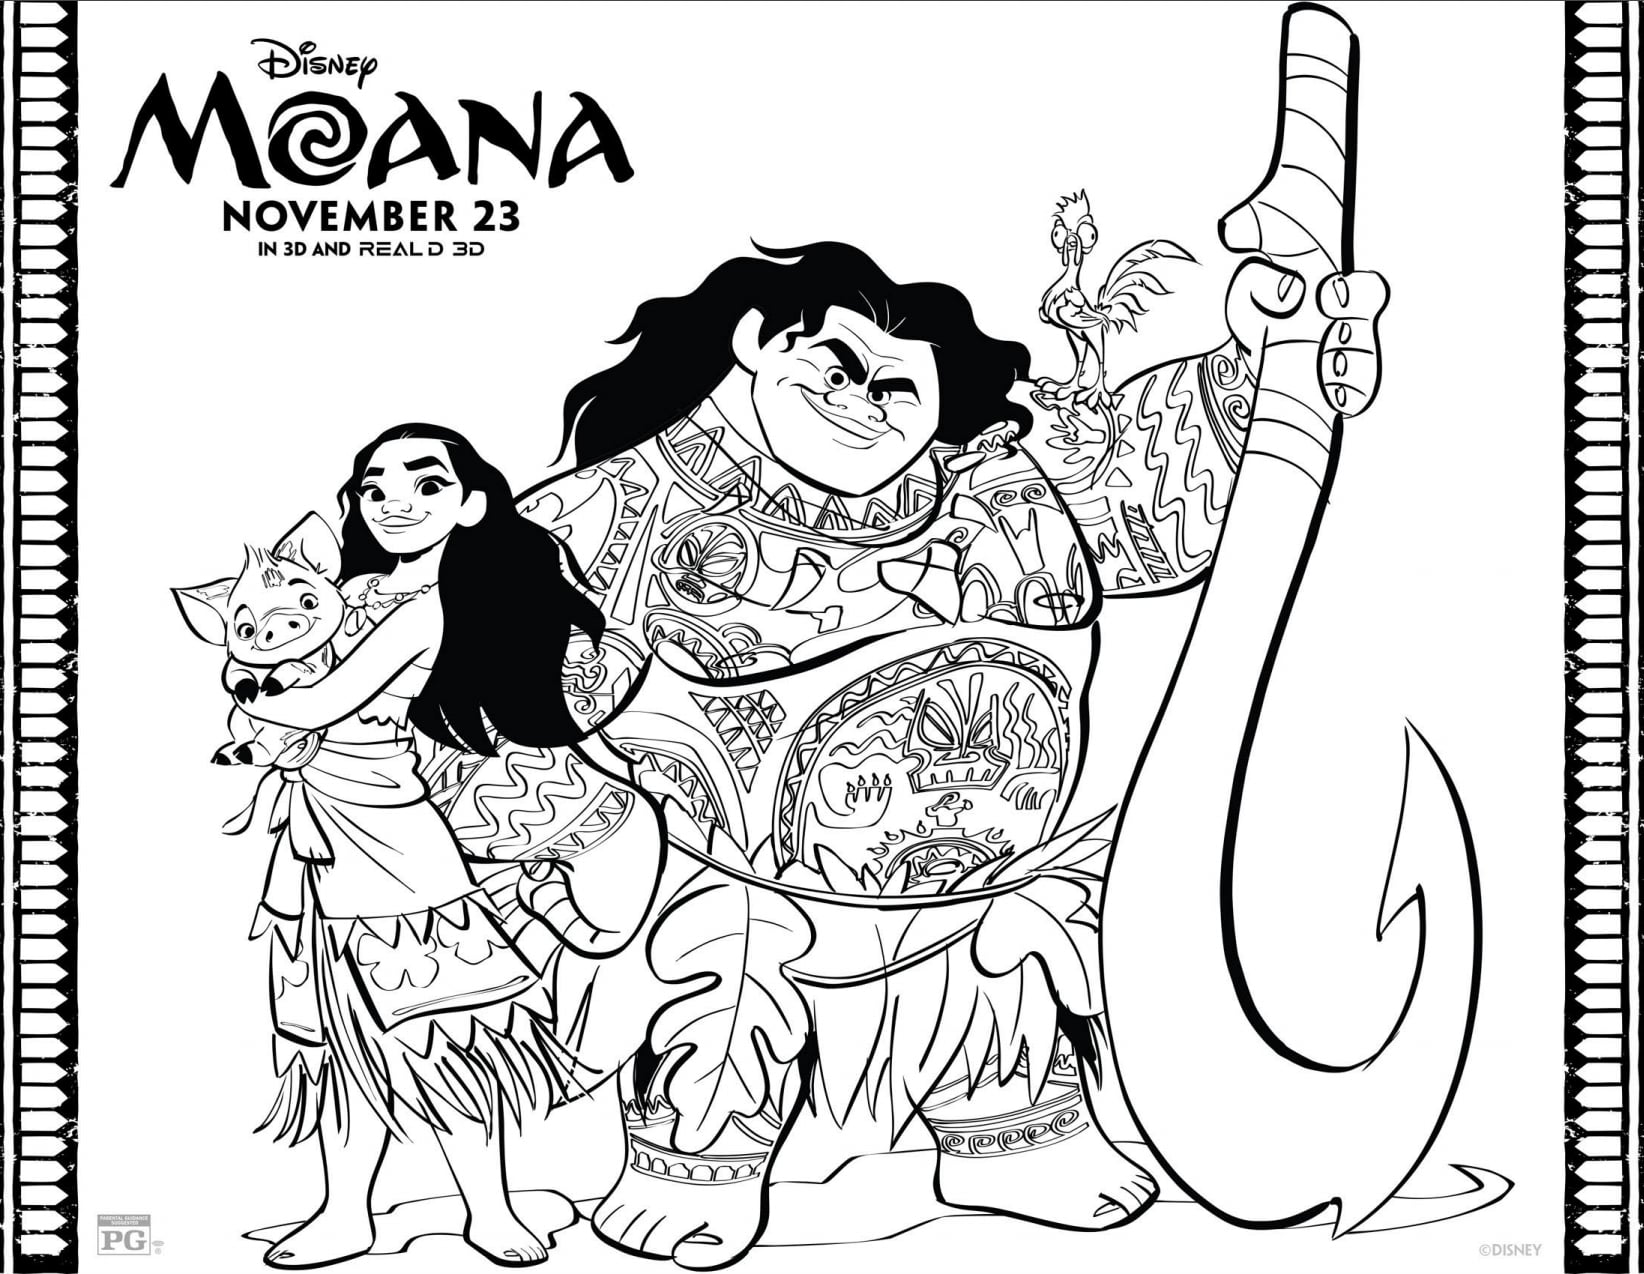 Disney S Printable Moana And Maui Coloring Pages Popsugar Family